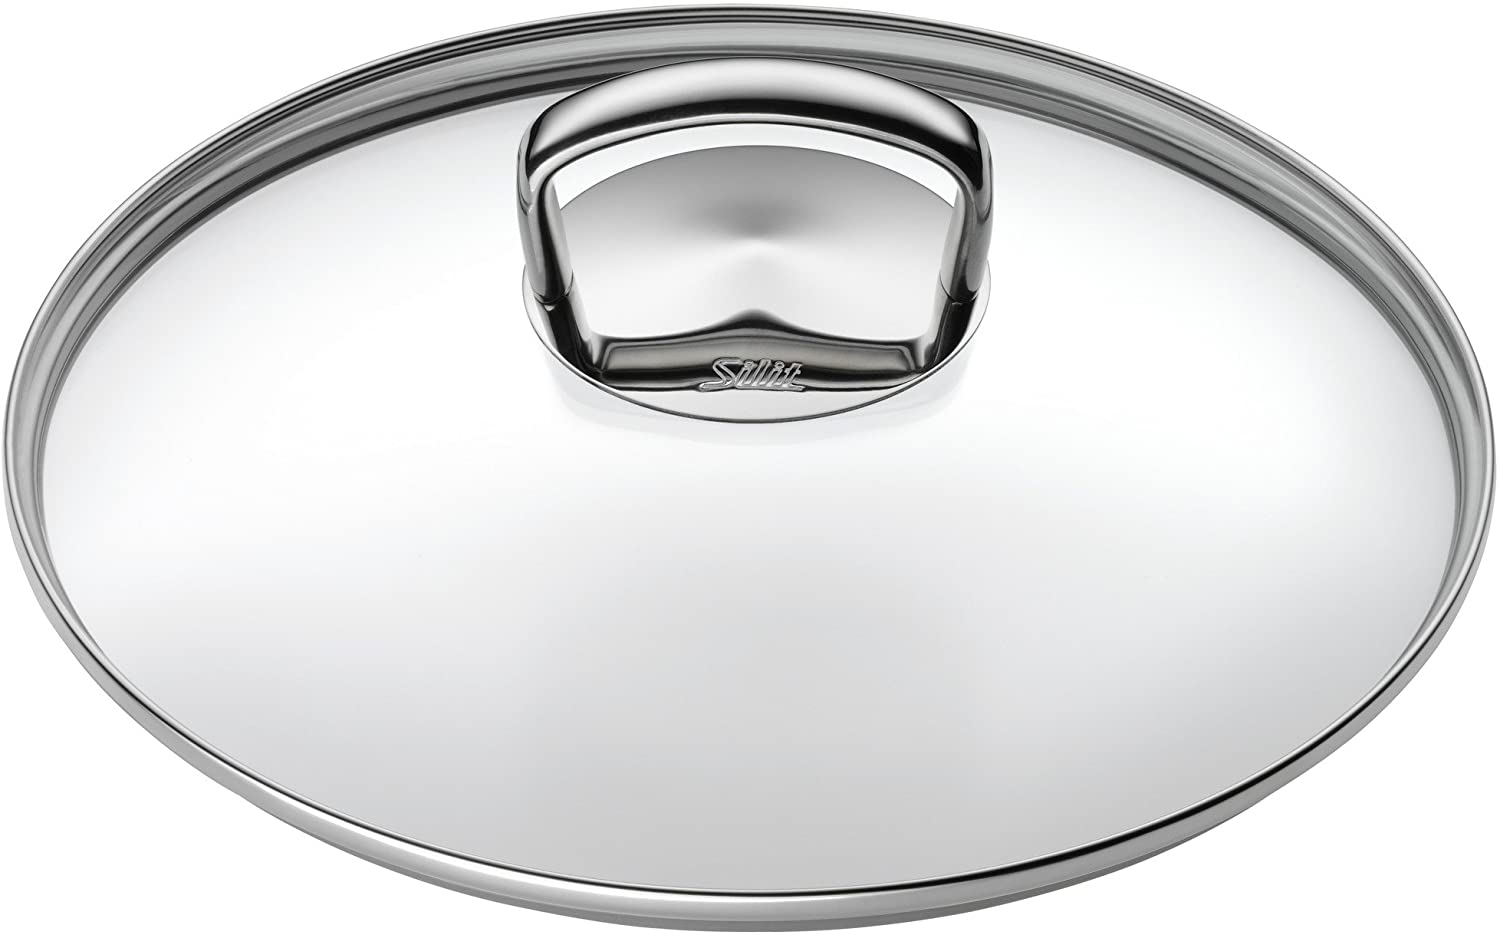 Silit Glass lid 28 cm with metal handle, lid for woks, heat-resistant glass, dishwasher safe